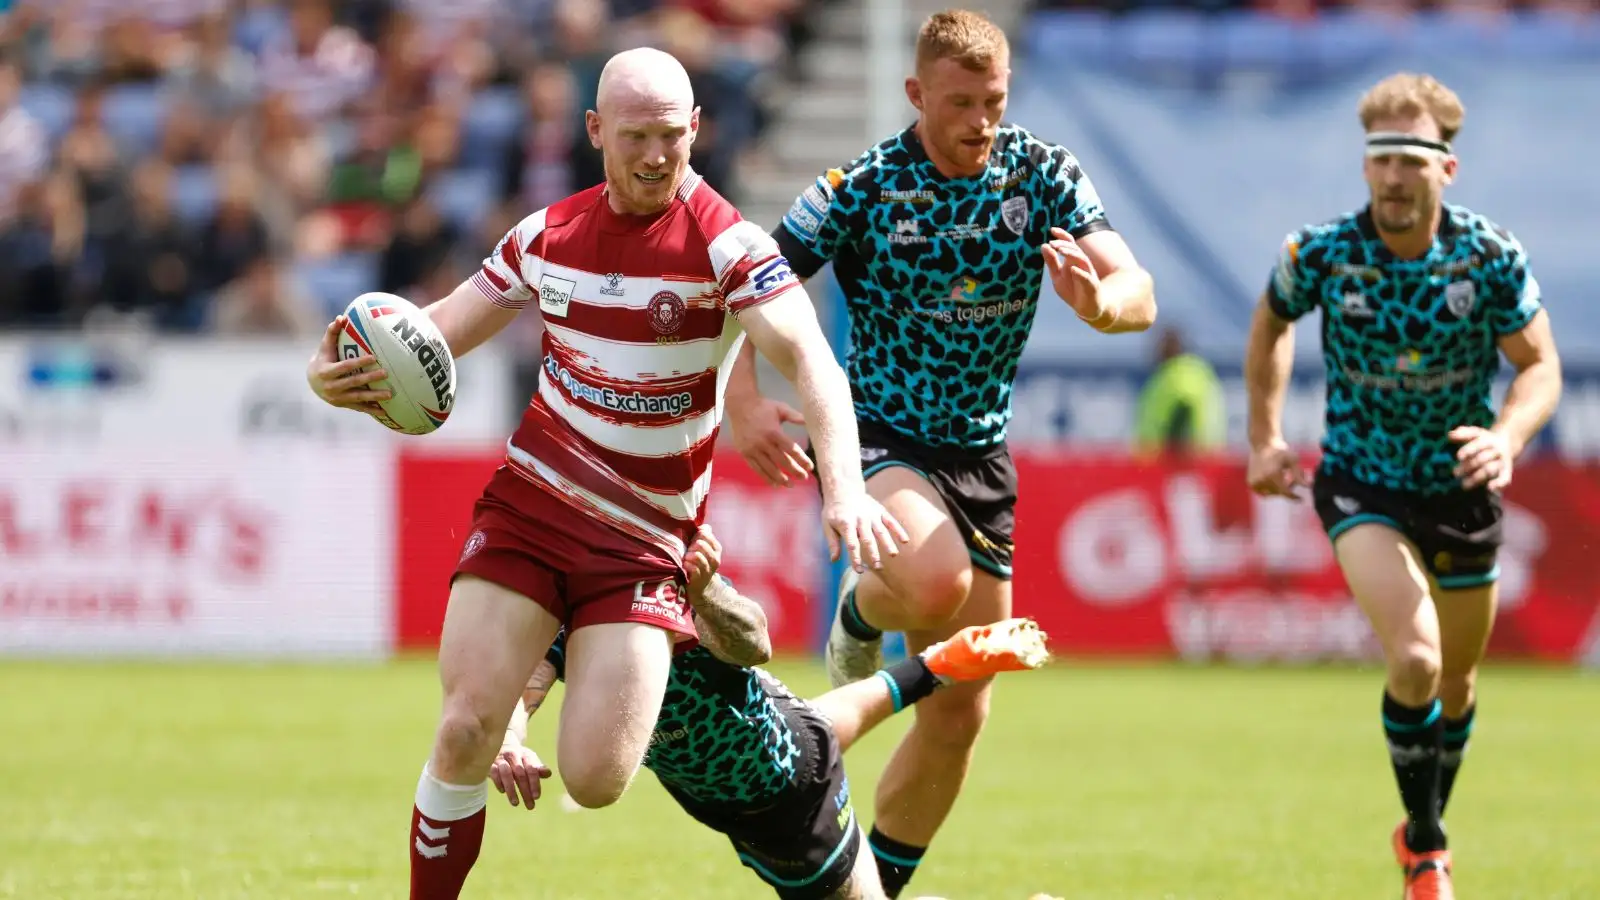 Wigan Warriors veteran Liam Farrell lauds value of League Leaders’ Shield; ‘We’ll give this the celebrations it deserves’